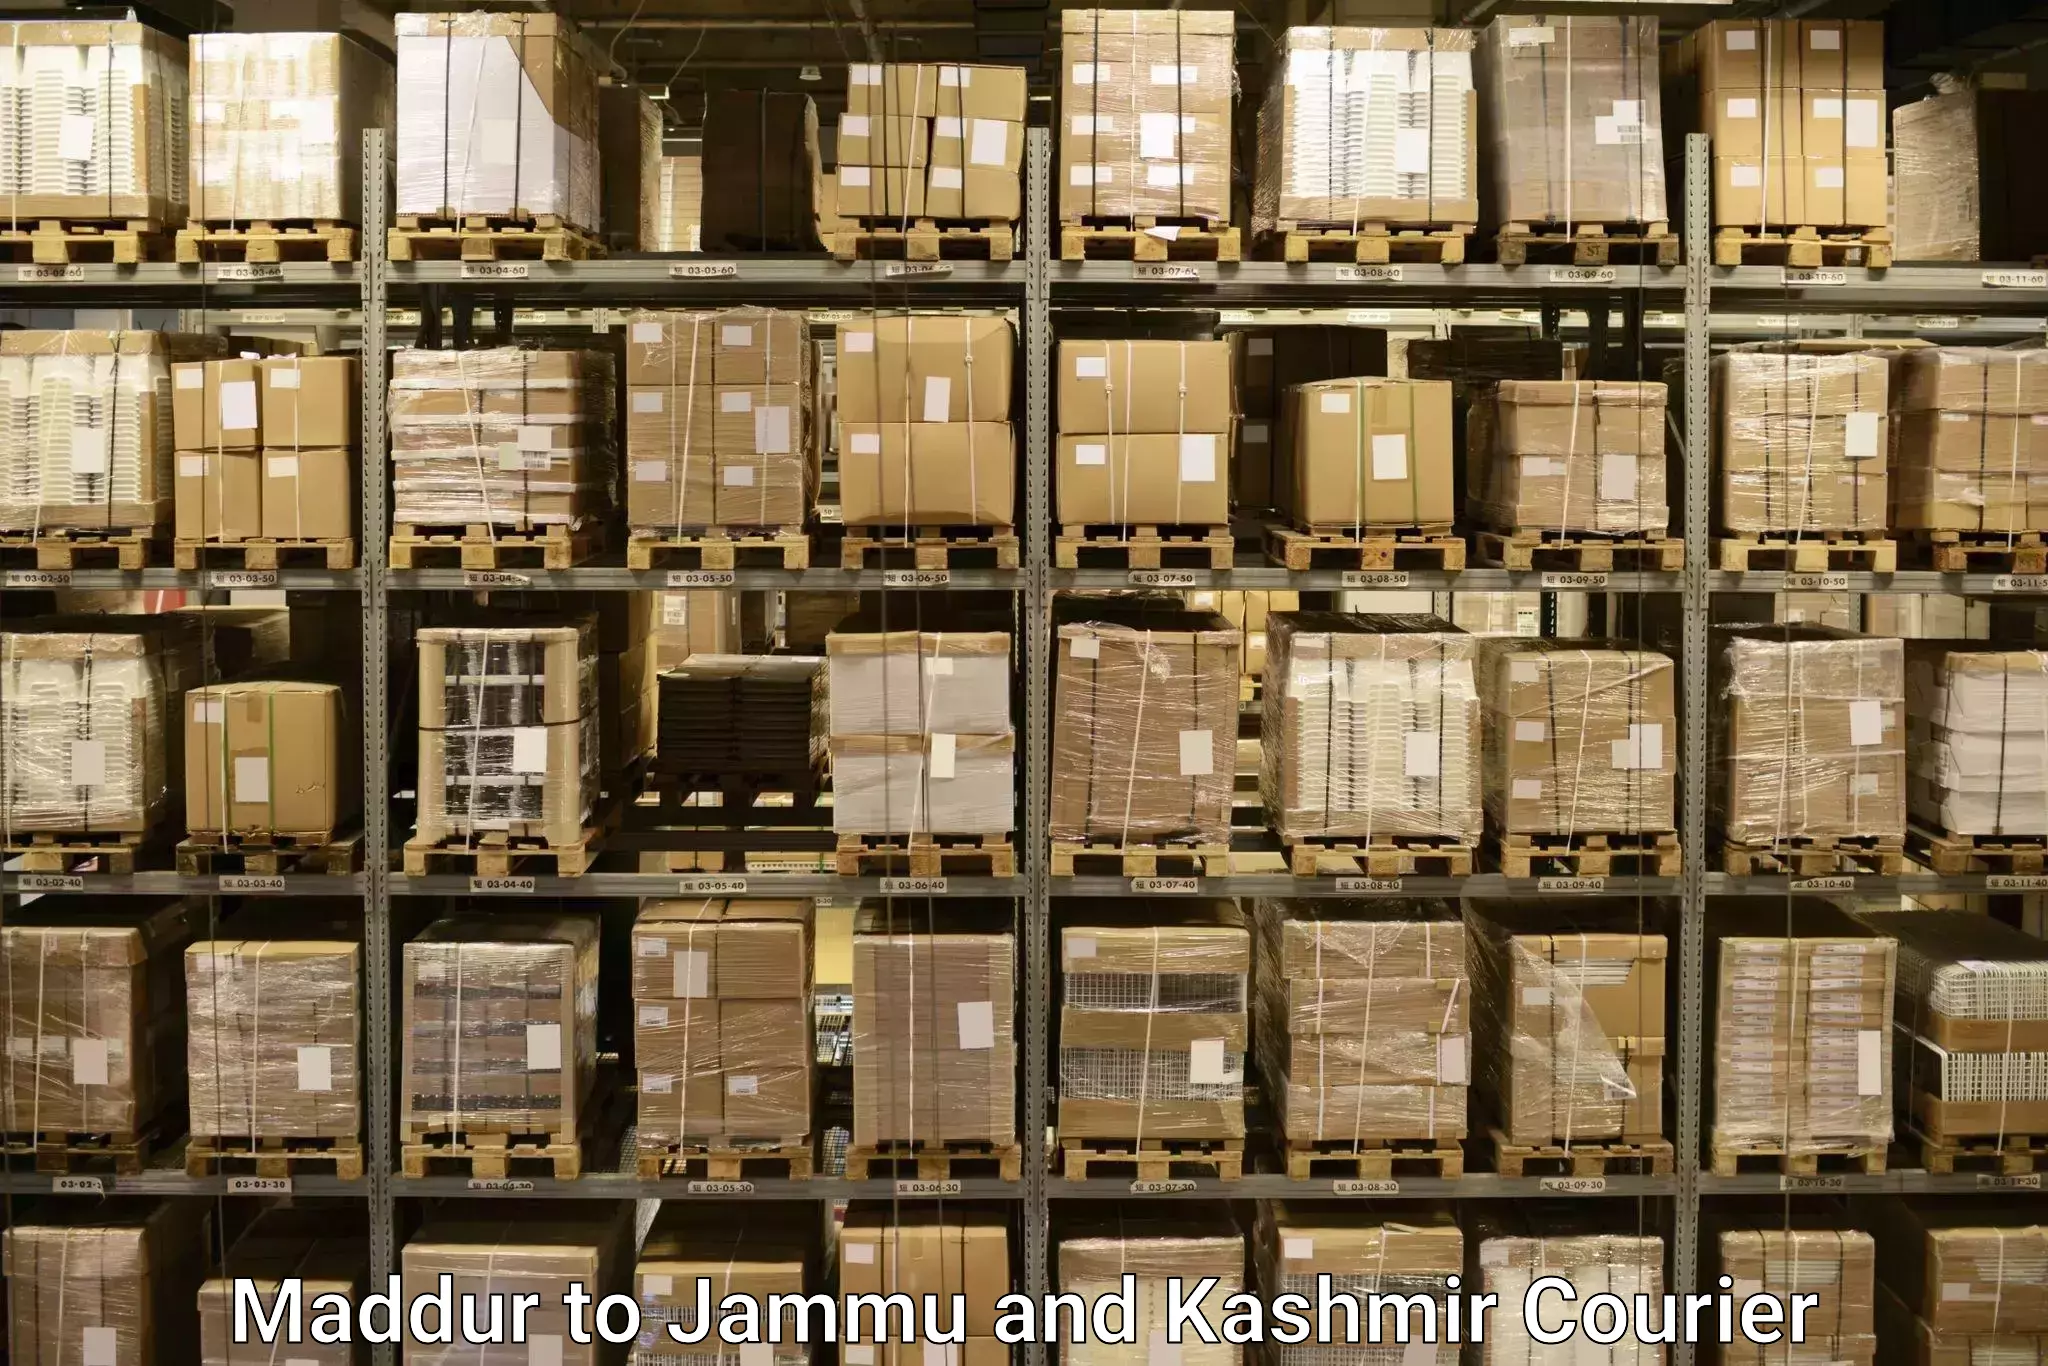 Luggage delivery network Maddur to Jammu and Kashmir